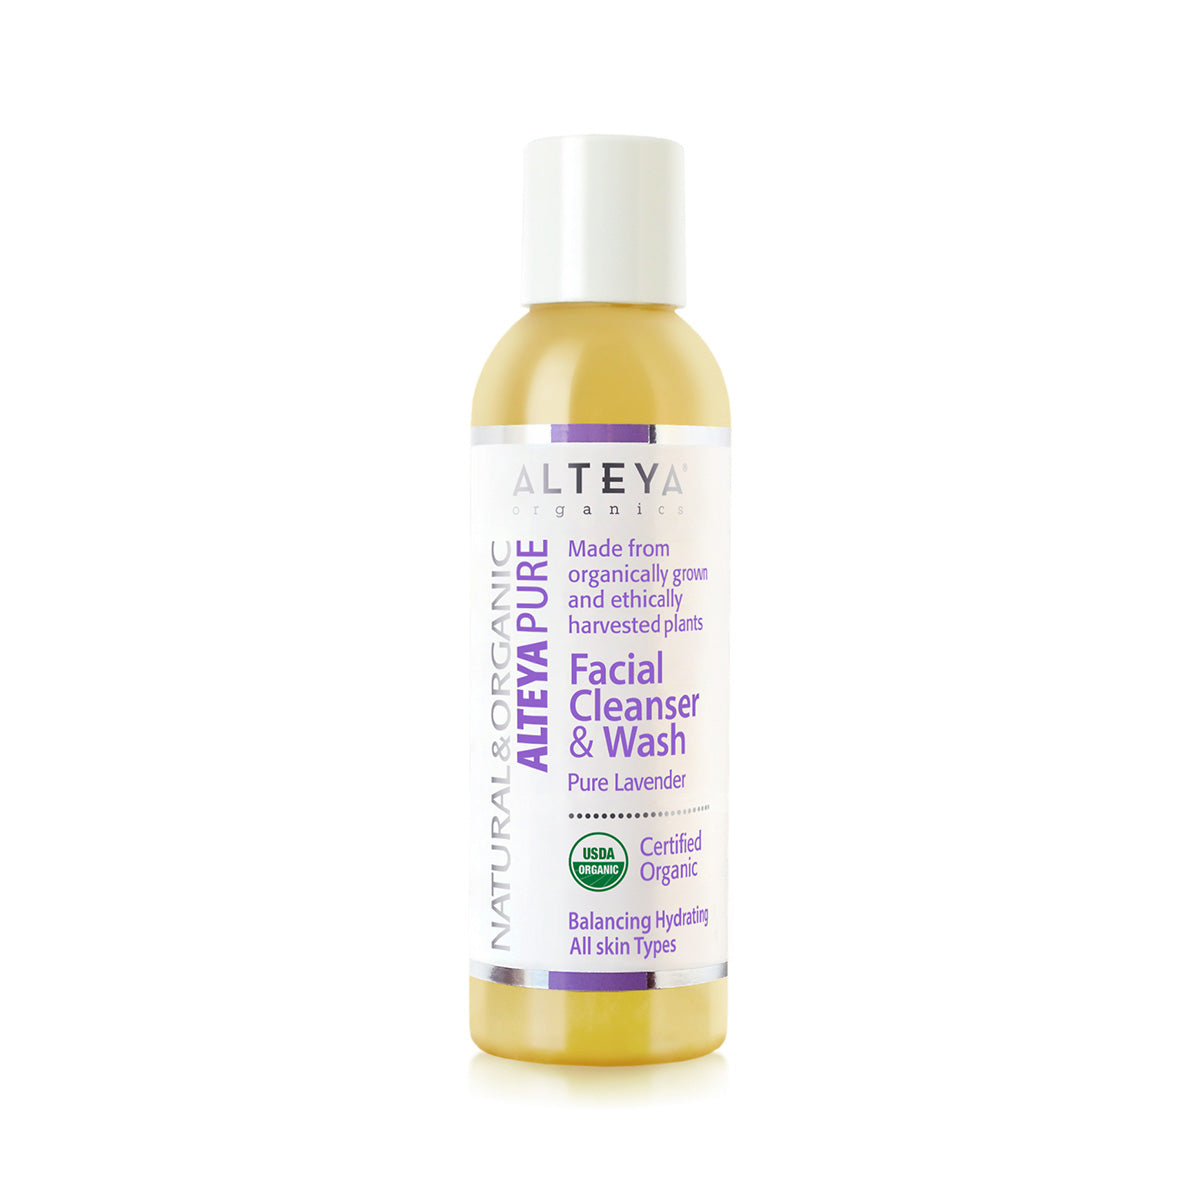 An organic bottle of Alteya Organics Facial Cleanser & Wash - Pure Lavender on a white background.